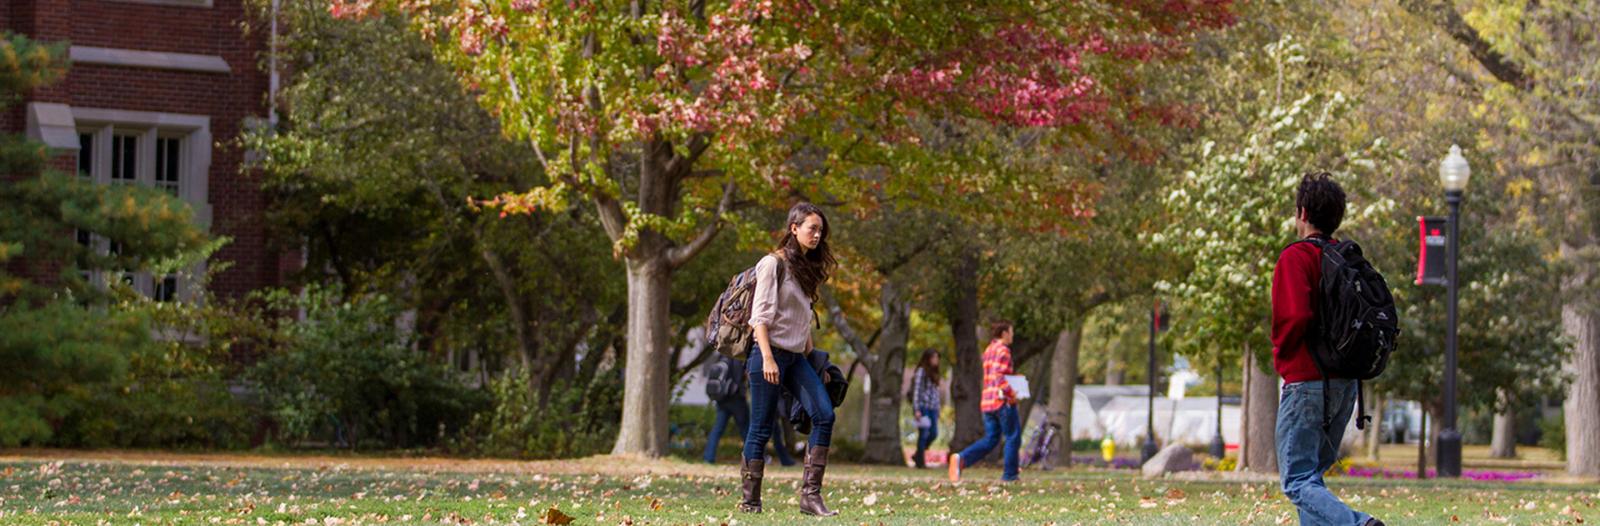 Students walking in central campus